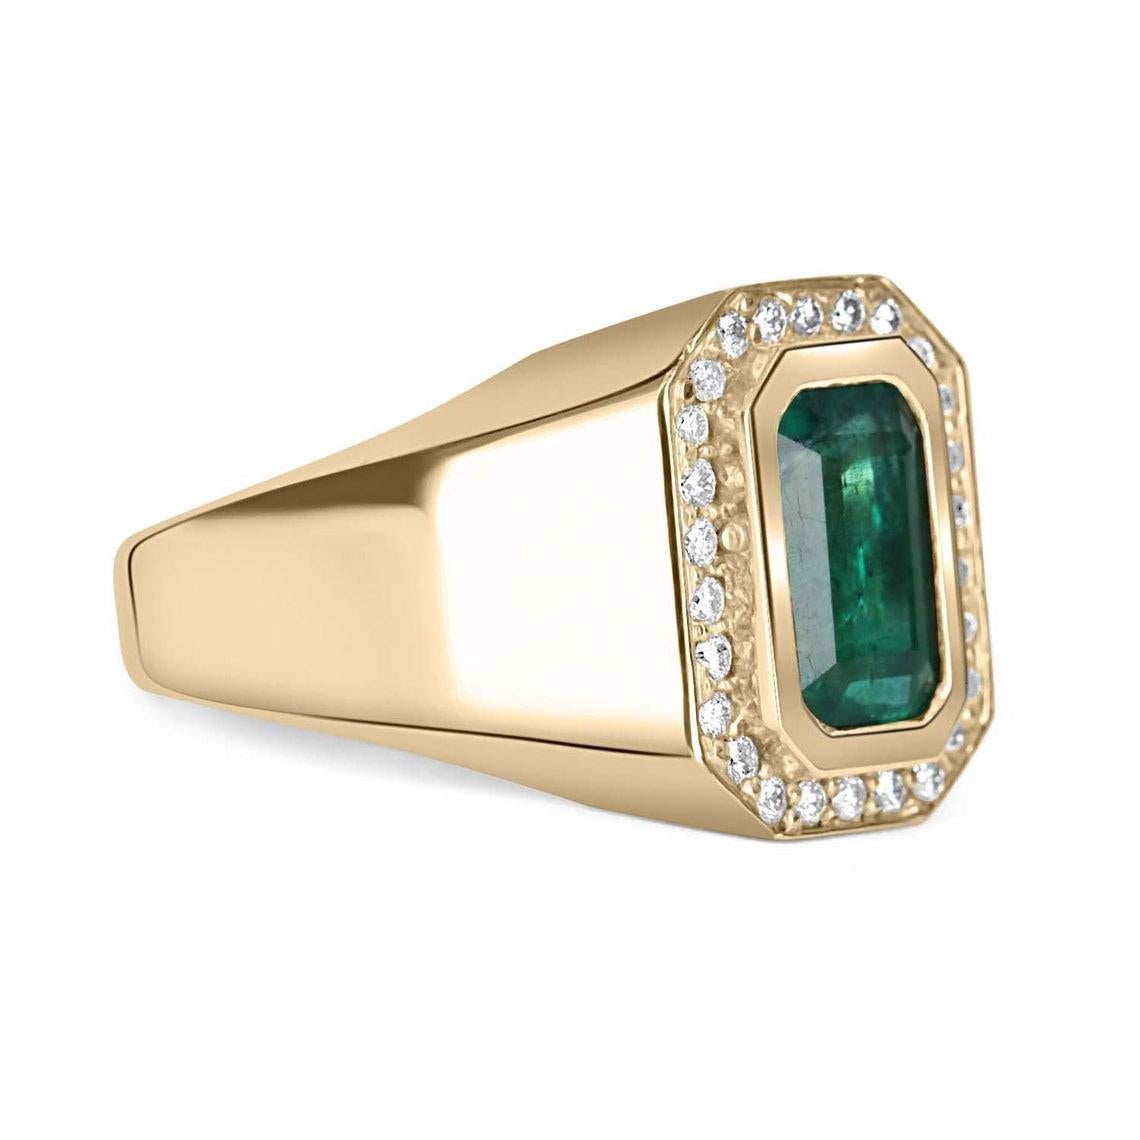 An important Colombian emerald and diamond men's cocktail ring. A large 2.50-carat emerald is bezel set in the very center. The men's ring is made in solid 14K yellow gold and is accented by brilliant round diamonds. This ring has excellent spread